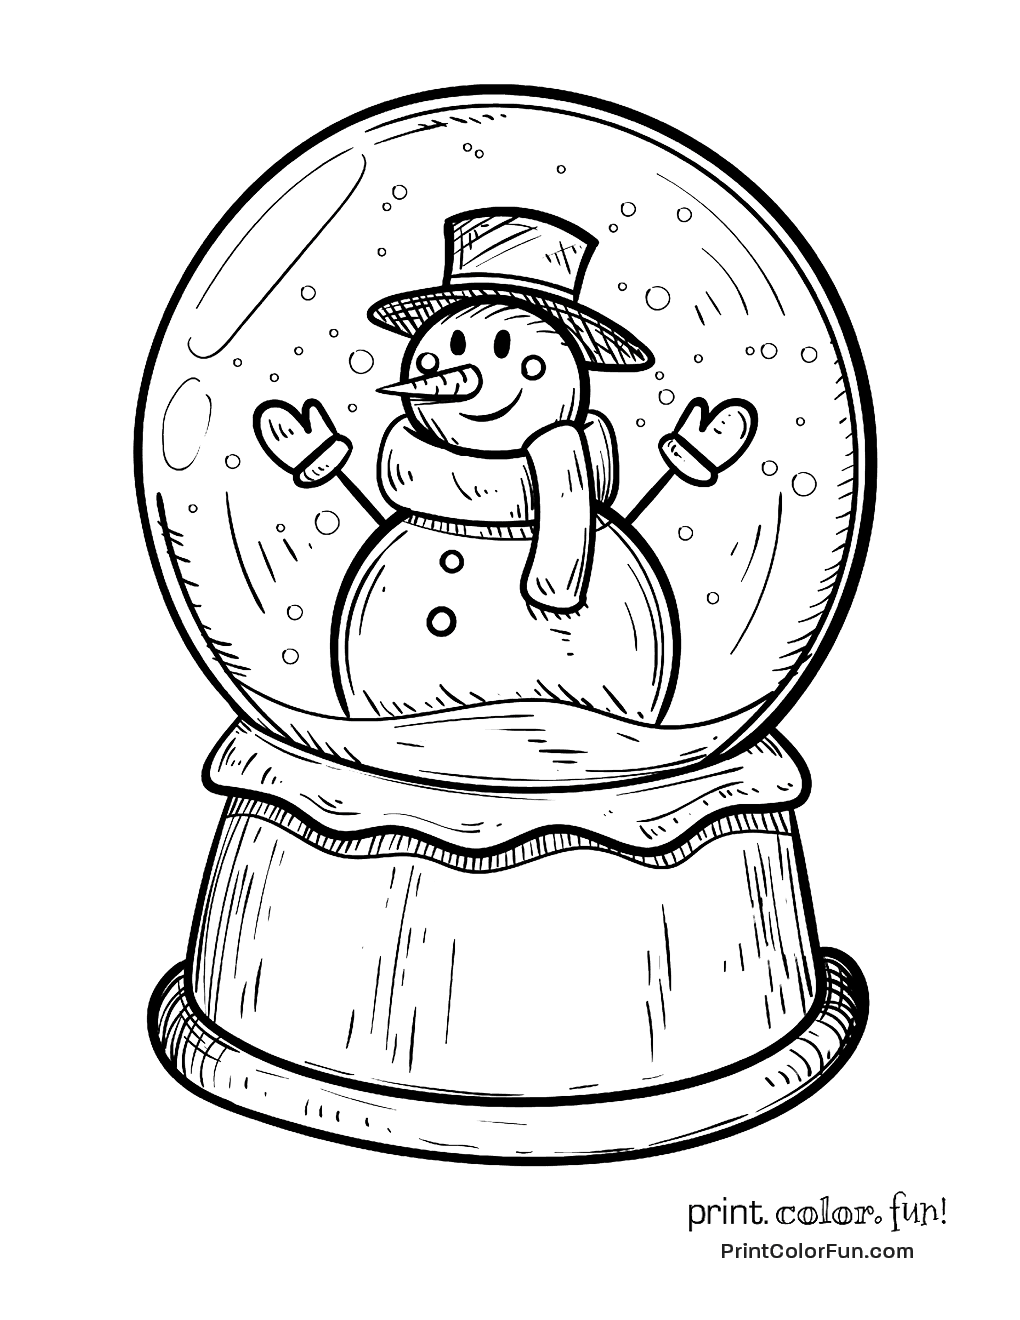 Coloring Pages : Free Snow Globeing Page My Little Pony For Kindergarten  Printable Christmas Staggering Snow Globe Coloring Page ~ Off-The Wall ATL